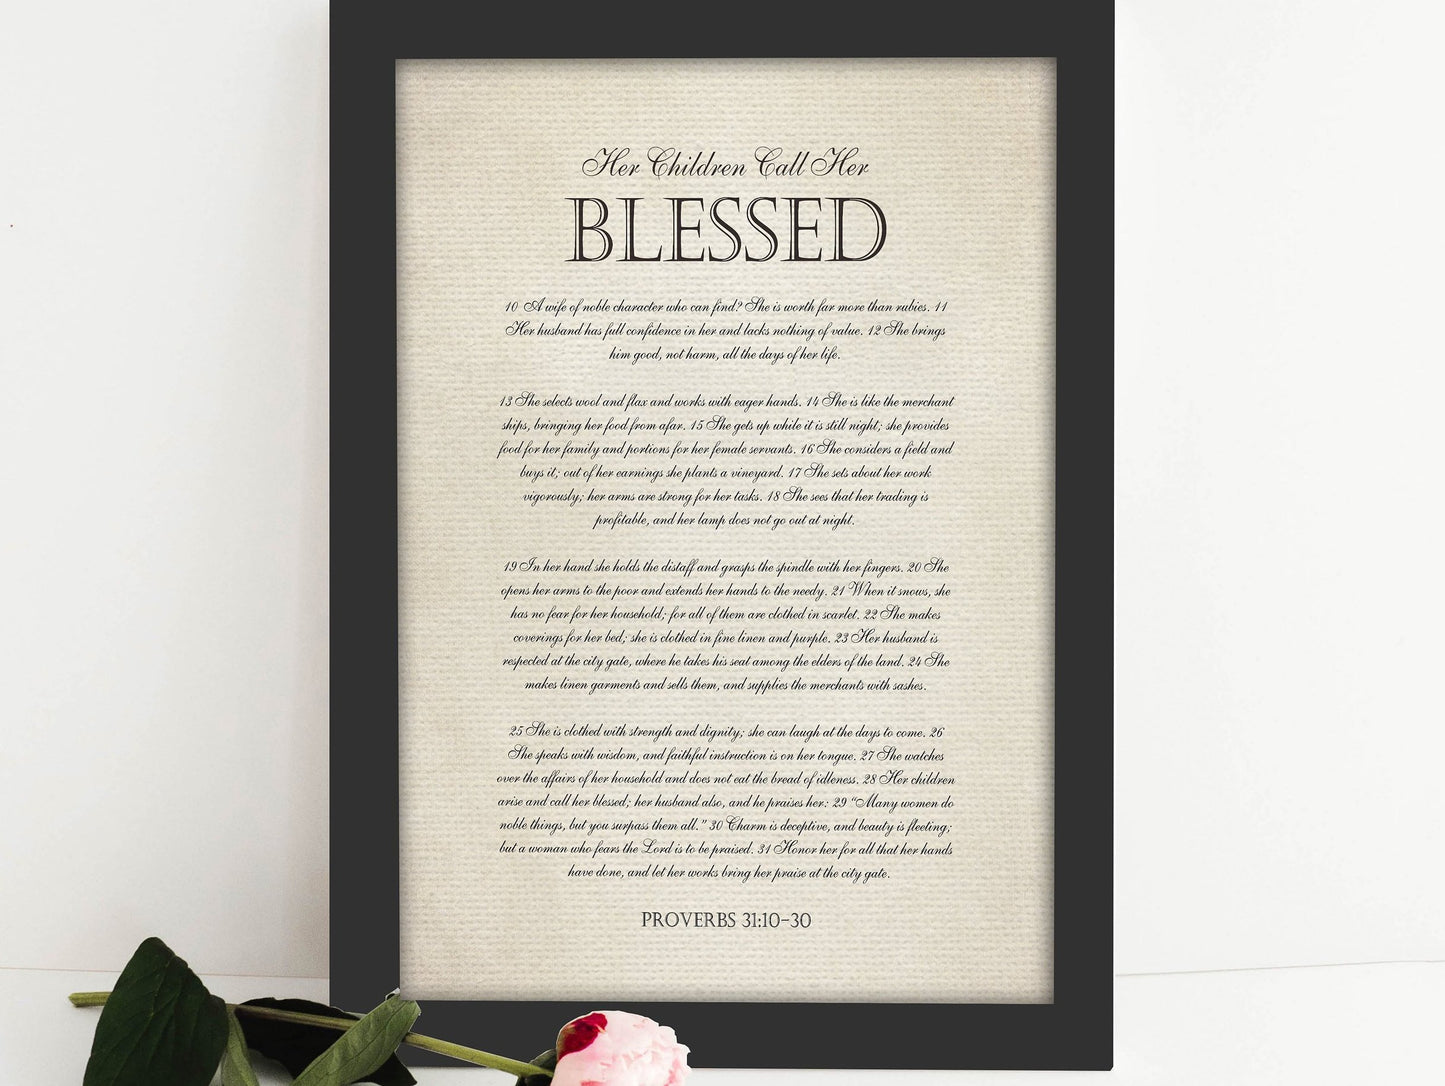 Her Children Call her Blessed, Framed Christian Gift, for Mother, Proverbs 31:10-30, Gift for Wife, Mother's Day Keepsake from Kids, Prov 31